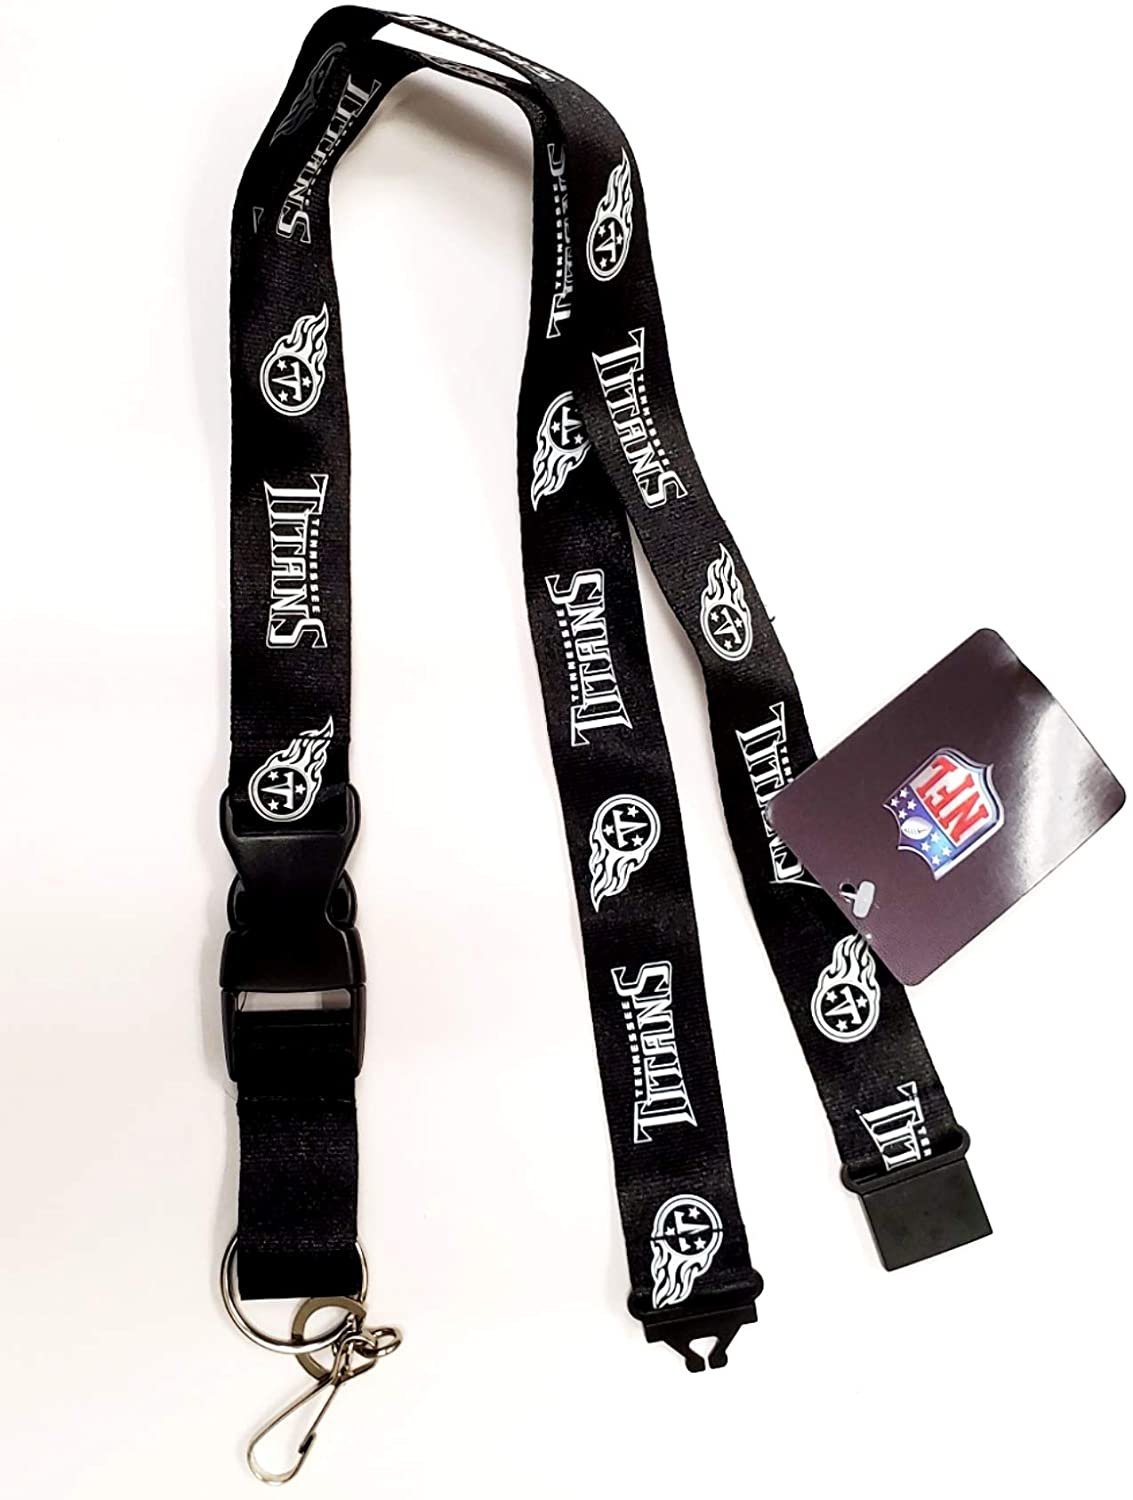 Tennessee Titans Blackout Lanyard Keychain Double Sided Breakaway Safety Design Adult 18 Inch